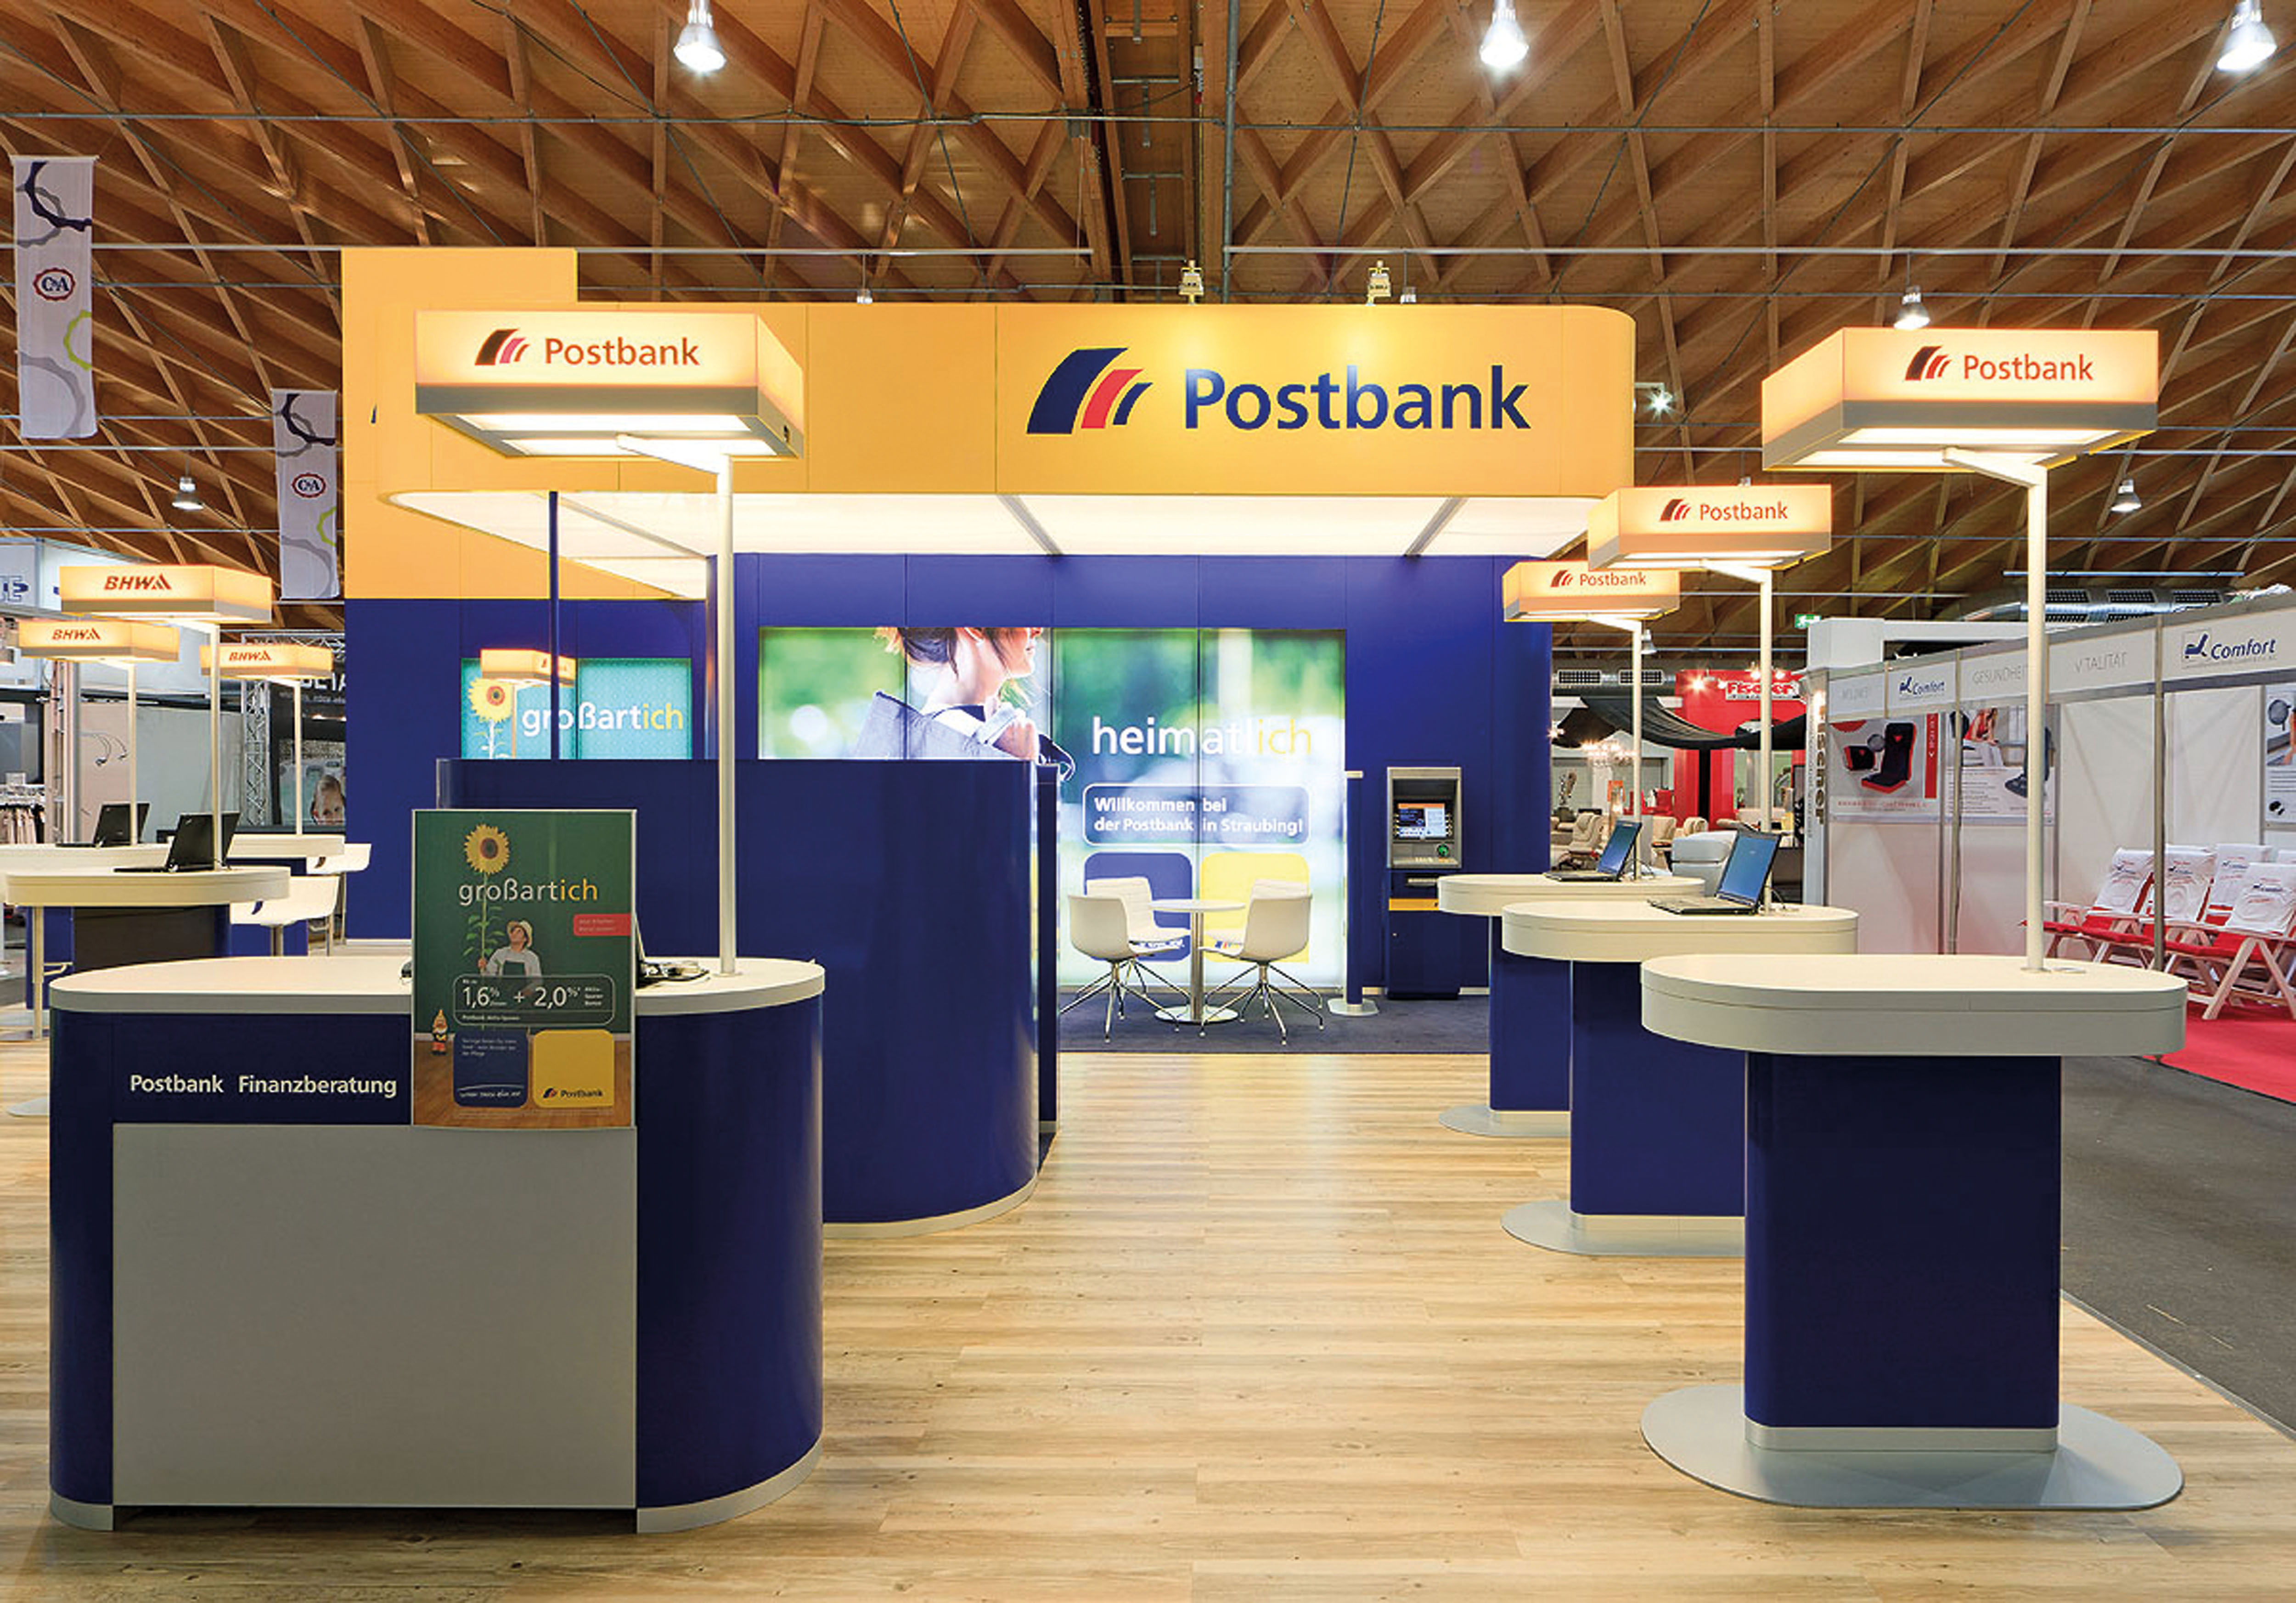 Exhibition stand resembles a Postbank branch